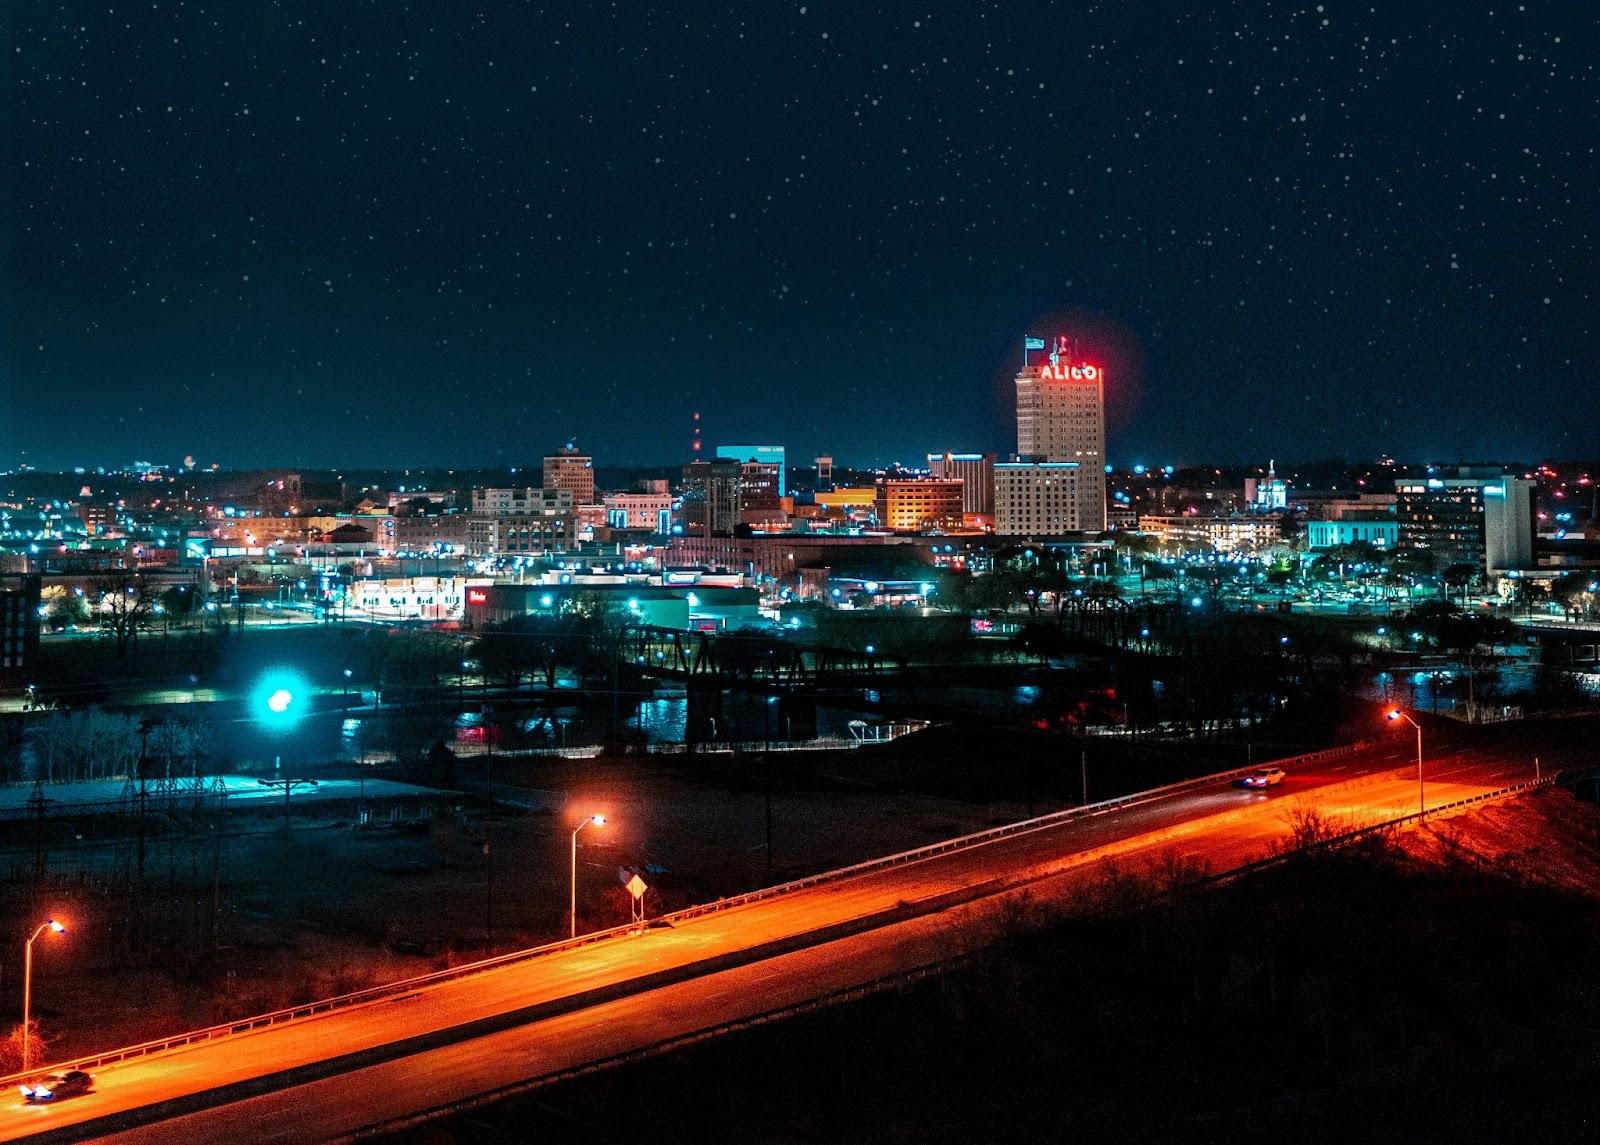 Best Things to Do in Waco at Night & Late Afternoon